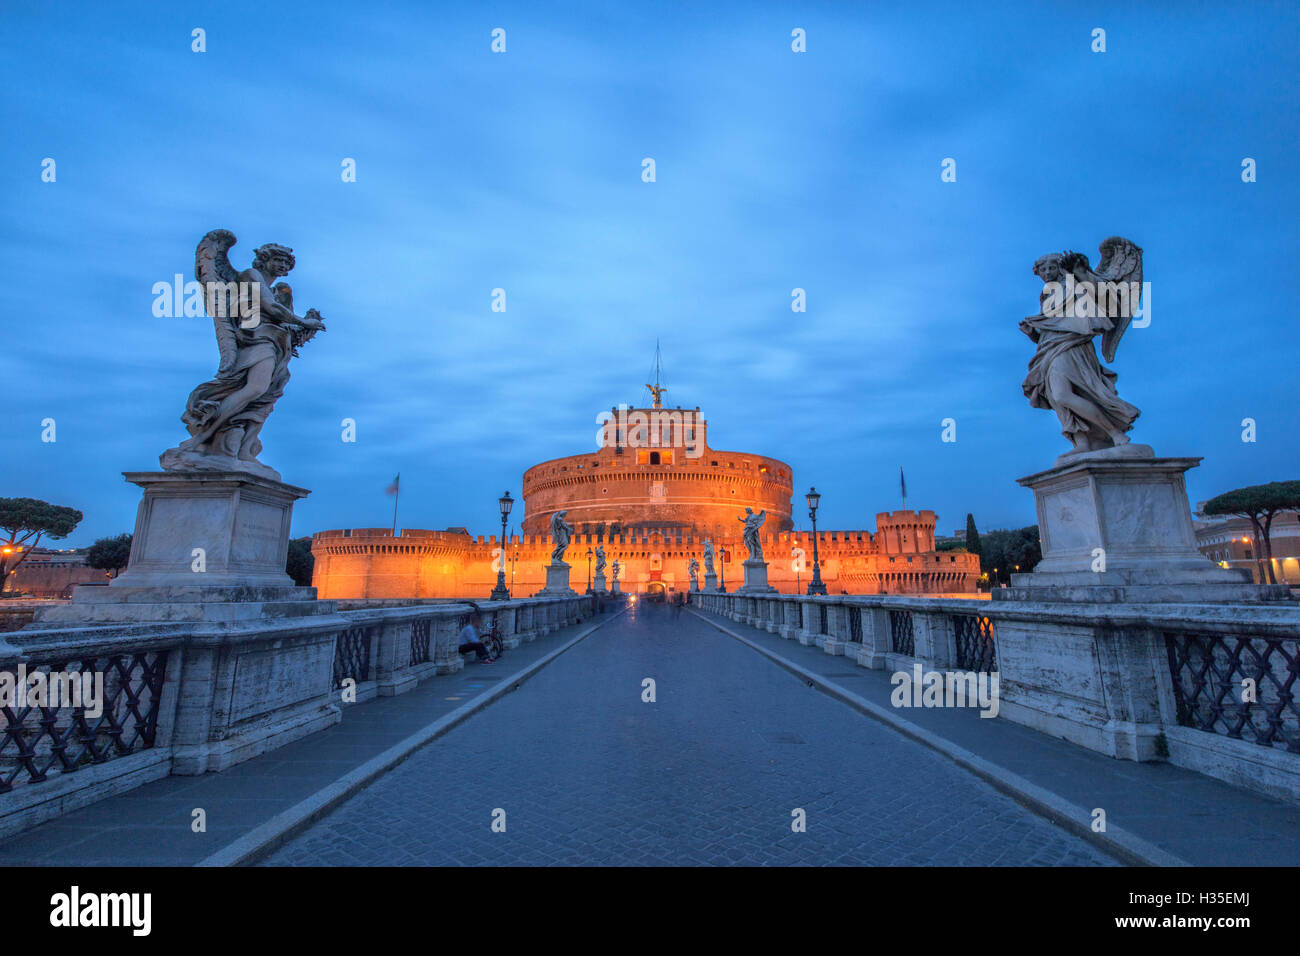 Dusk on the ancient palace of Castel Sant'Angelo with statues of angels on the bridge on Tiber RIver, UNESCO, Rome, Lazio, Italy Stock Photo